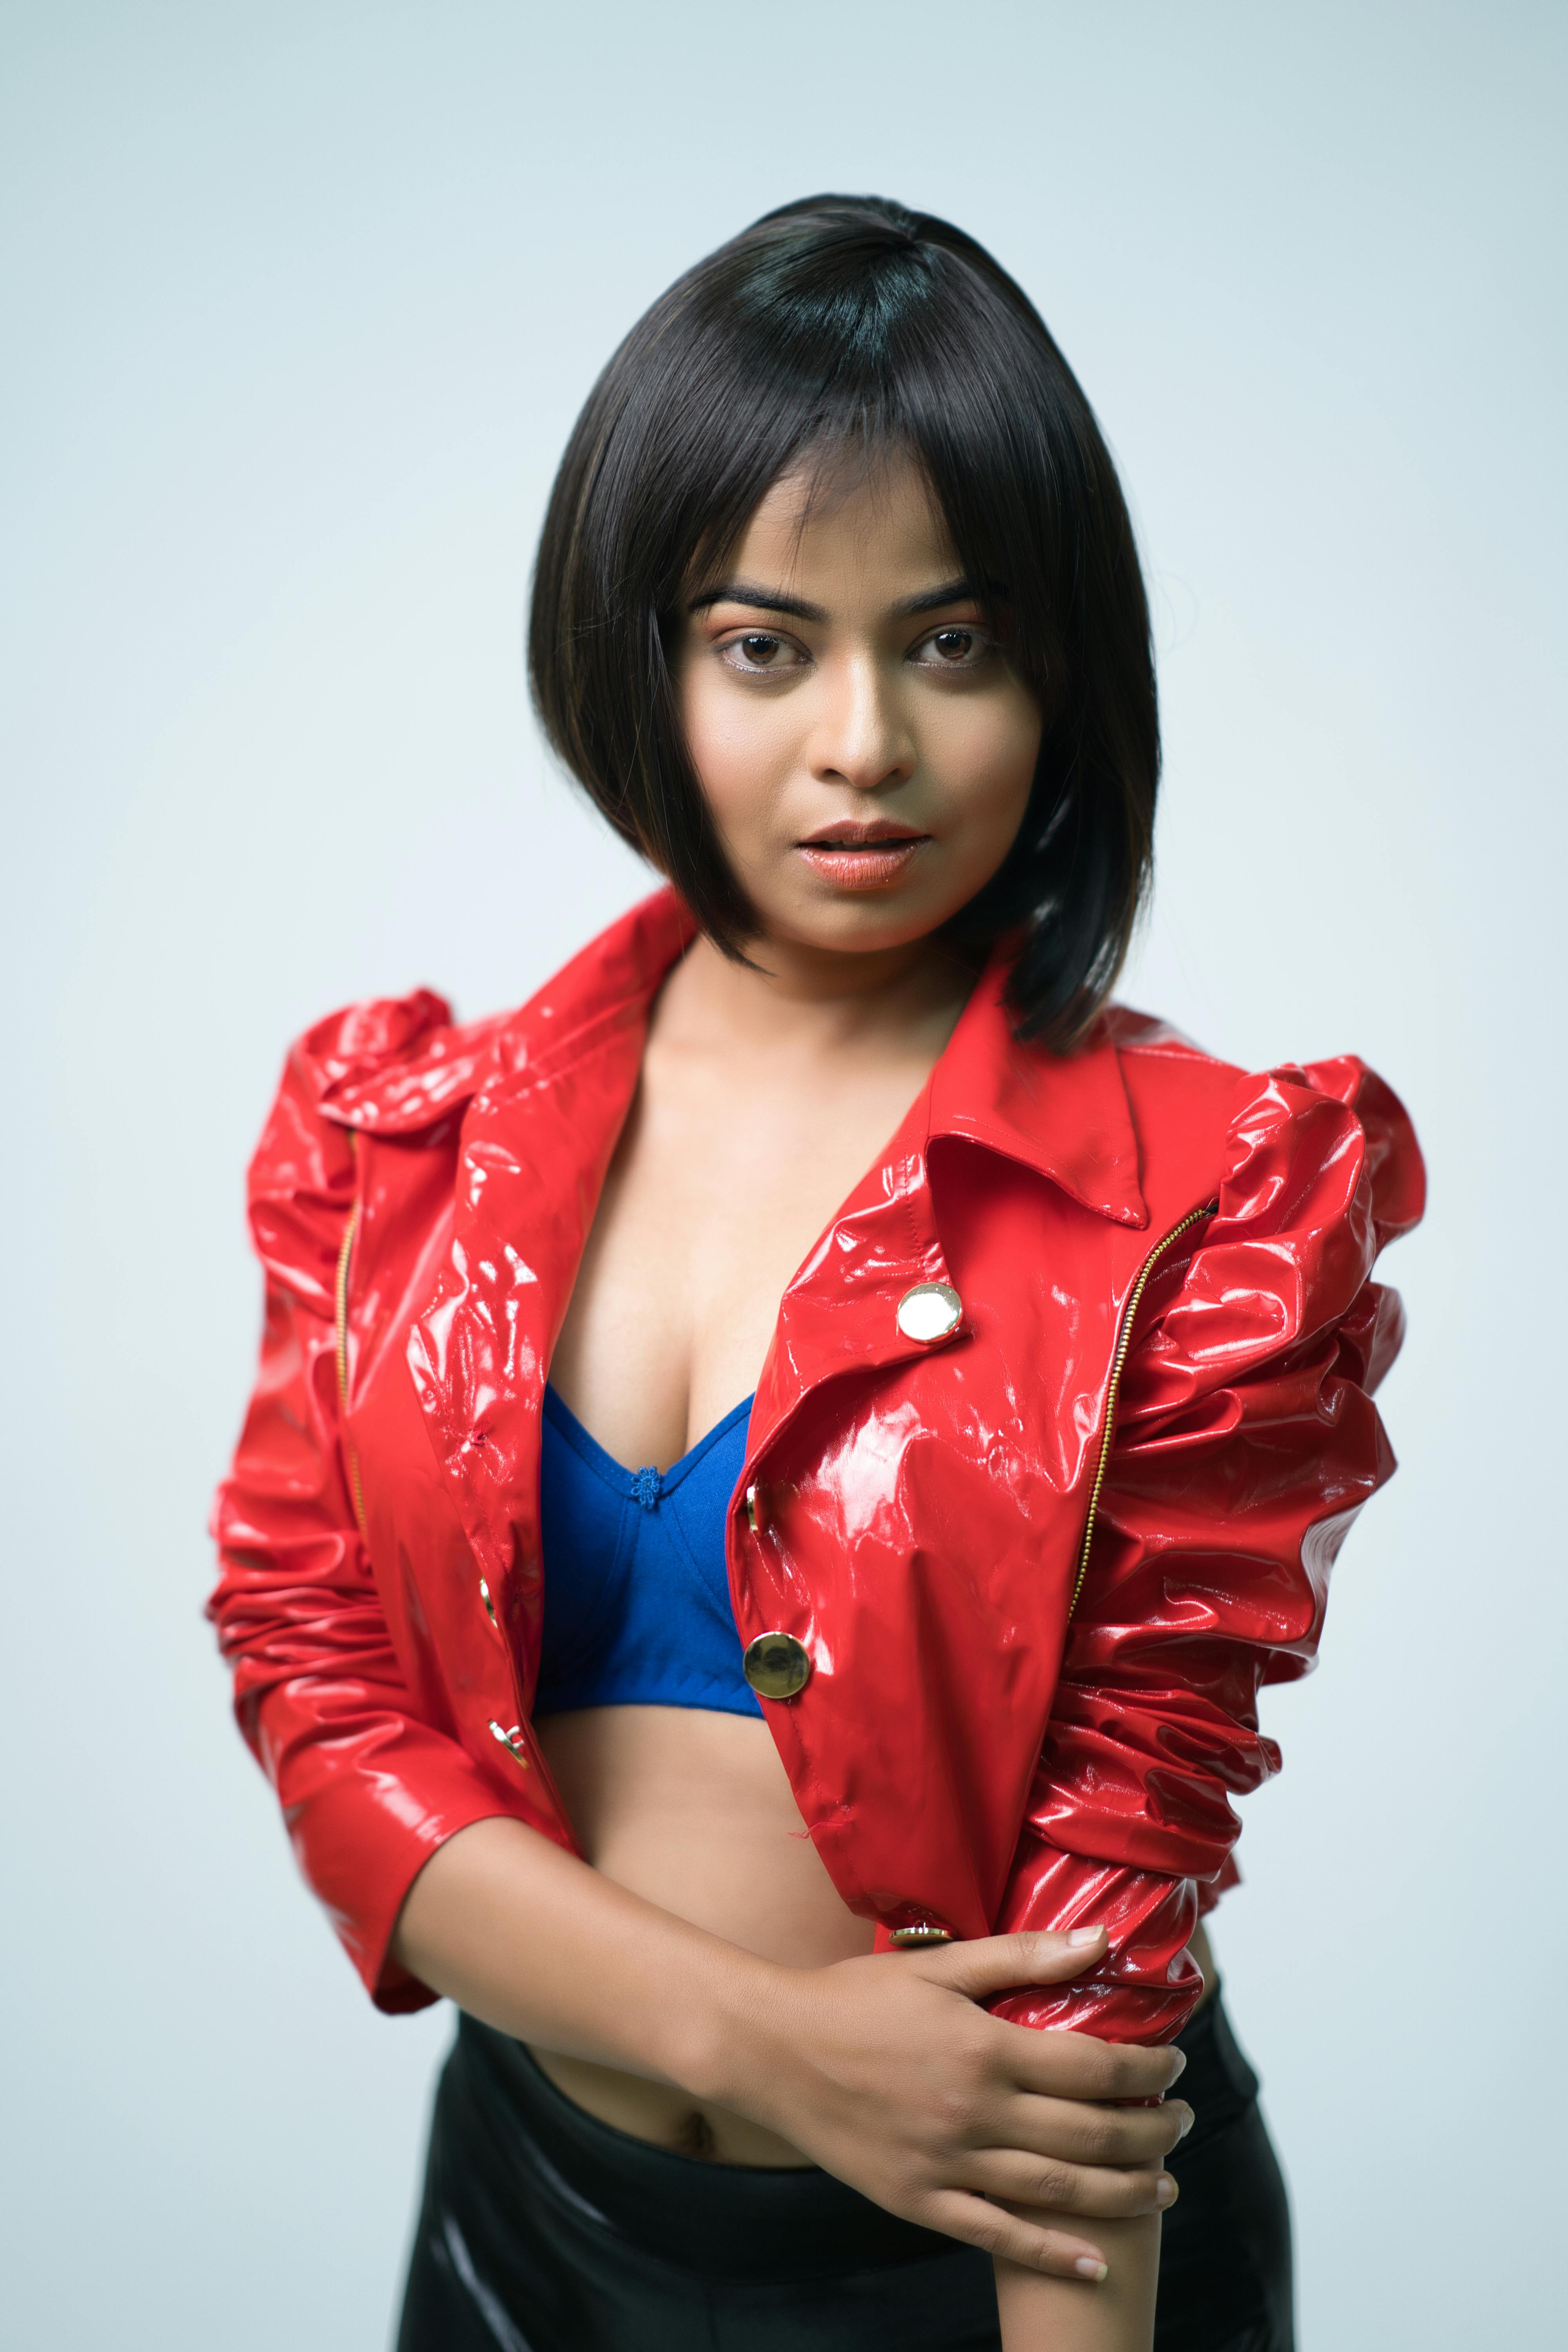 A Woman Wearing Red Leather Jacket Over a Blue Bra · Free Stock Photo